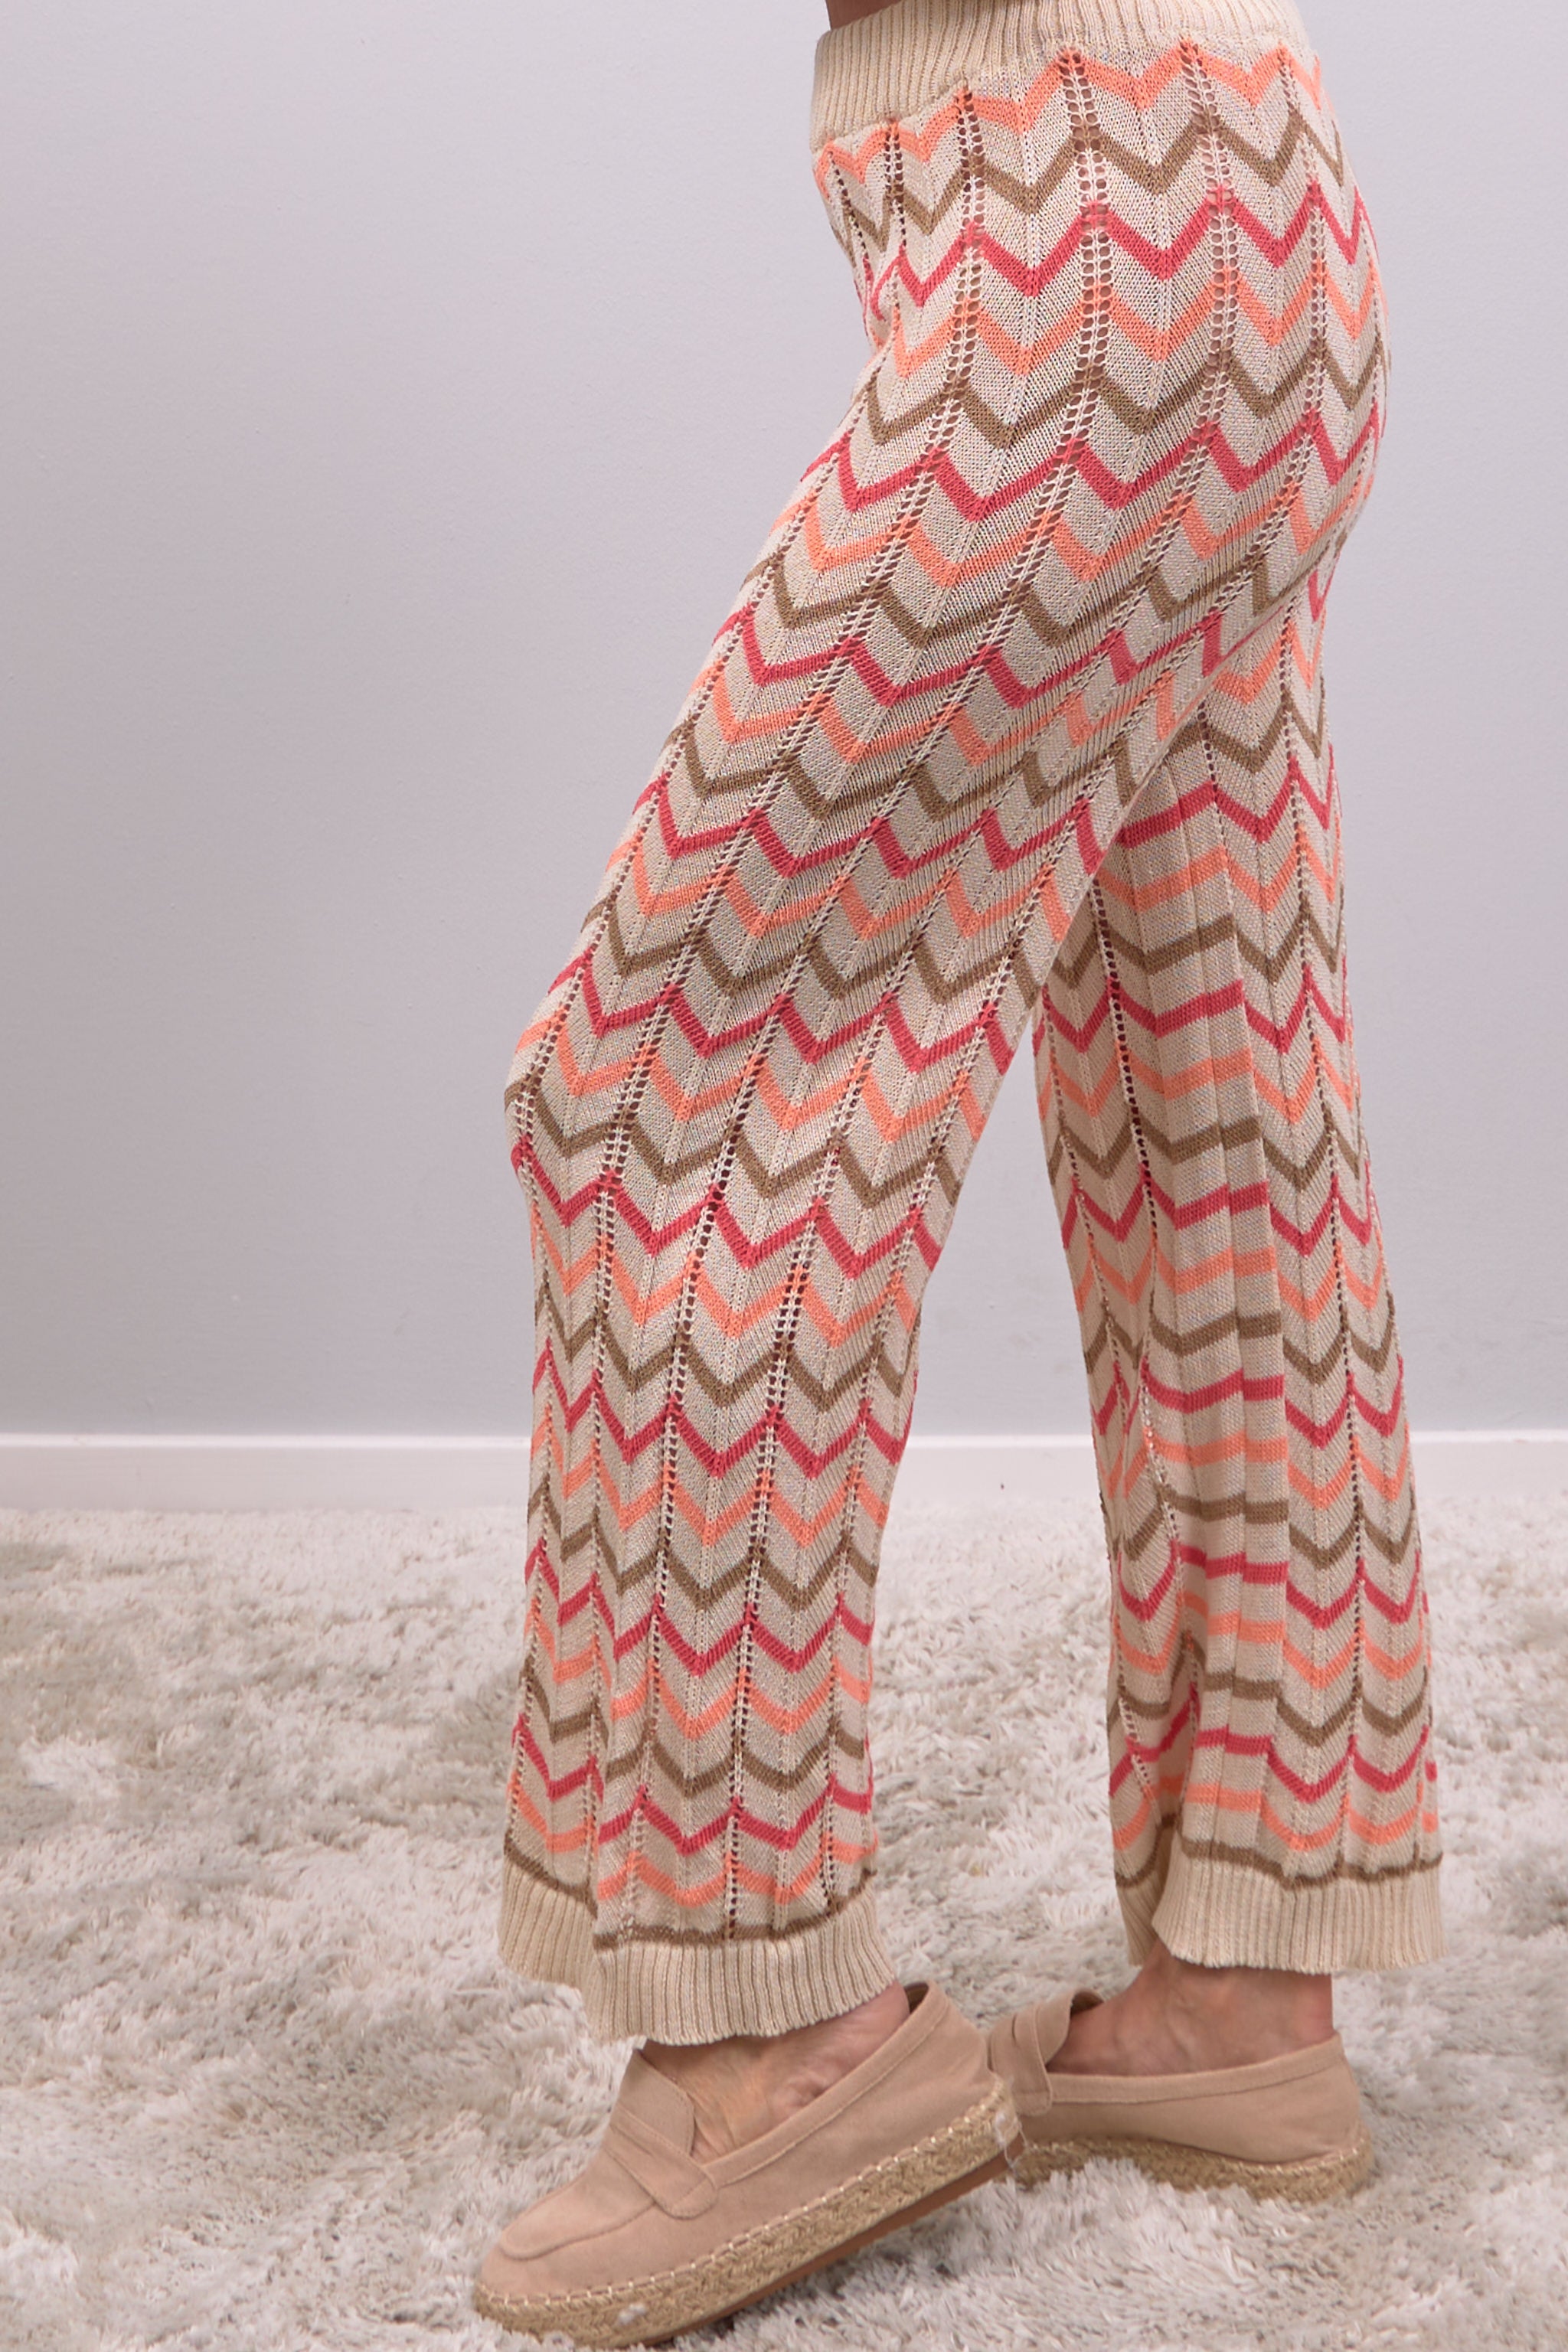 Retro style pants in pink